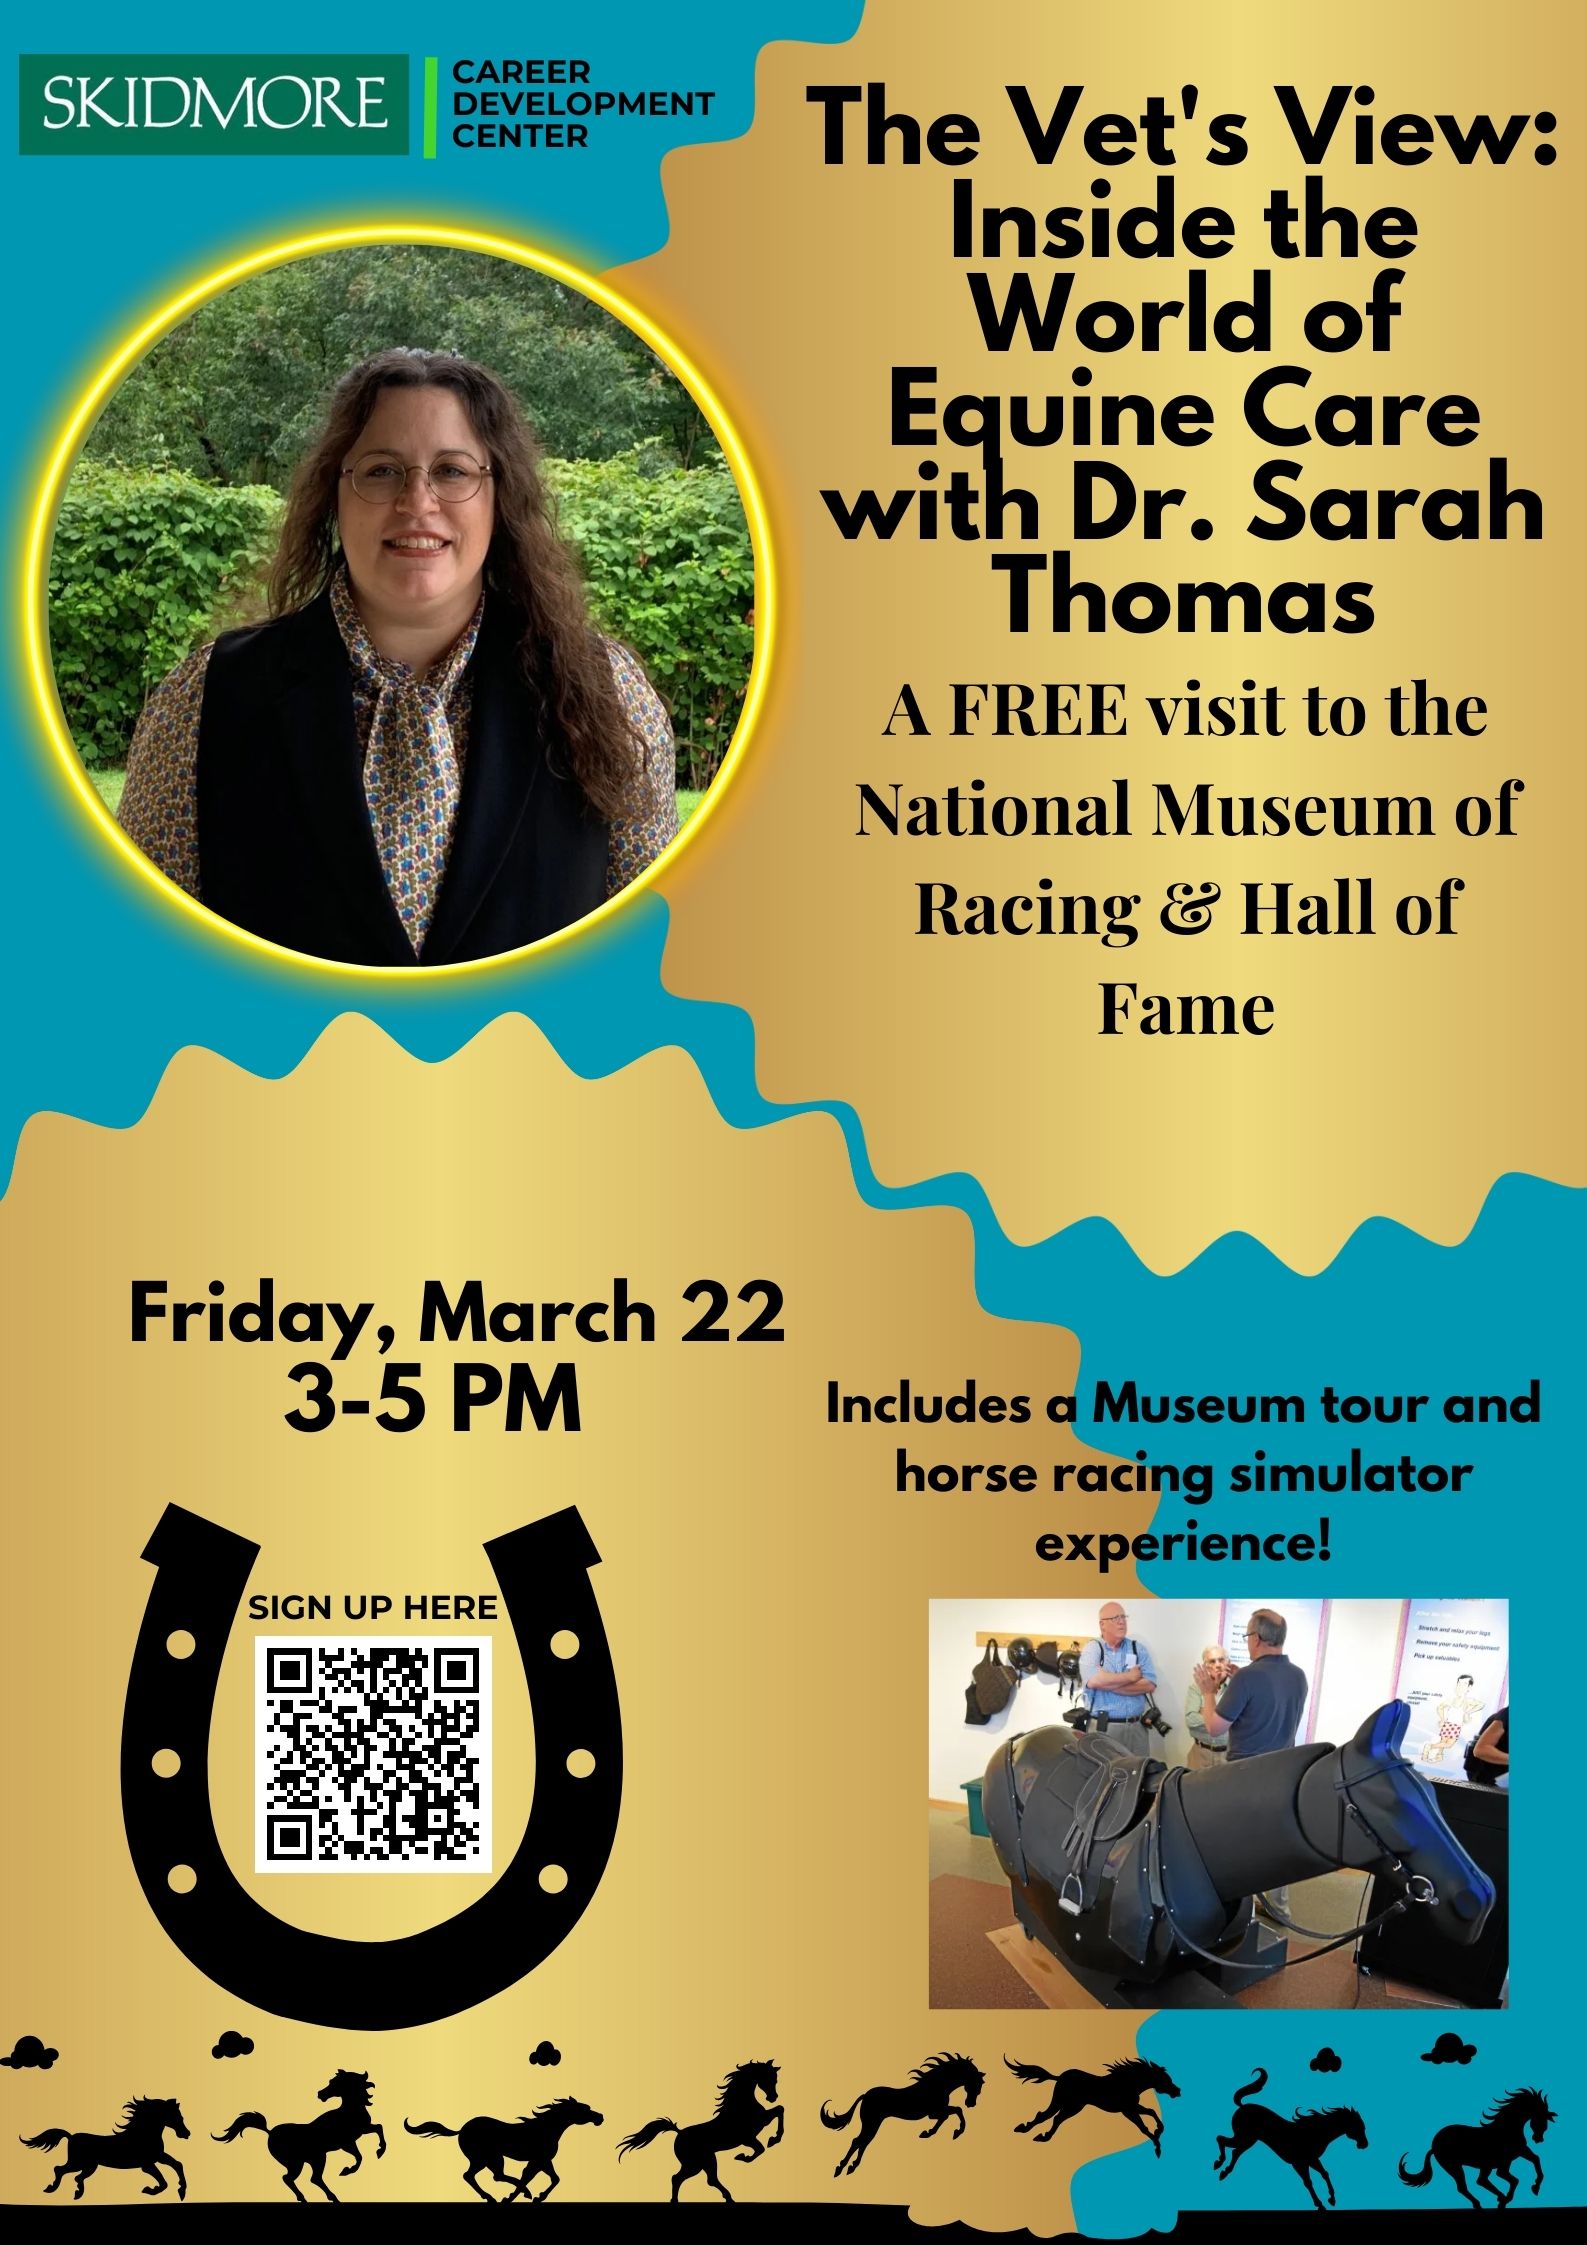 The Vet's View: Inside the World of Equine Care with Dr. Sarah Thomas